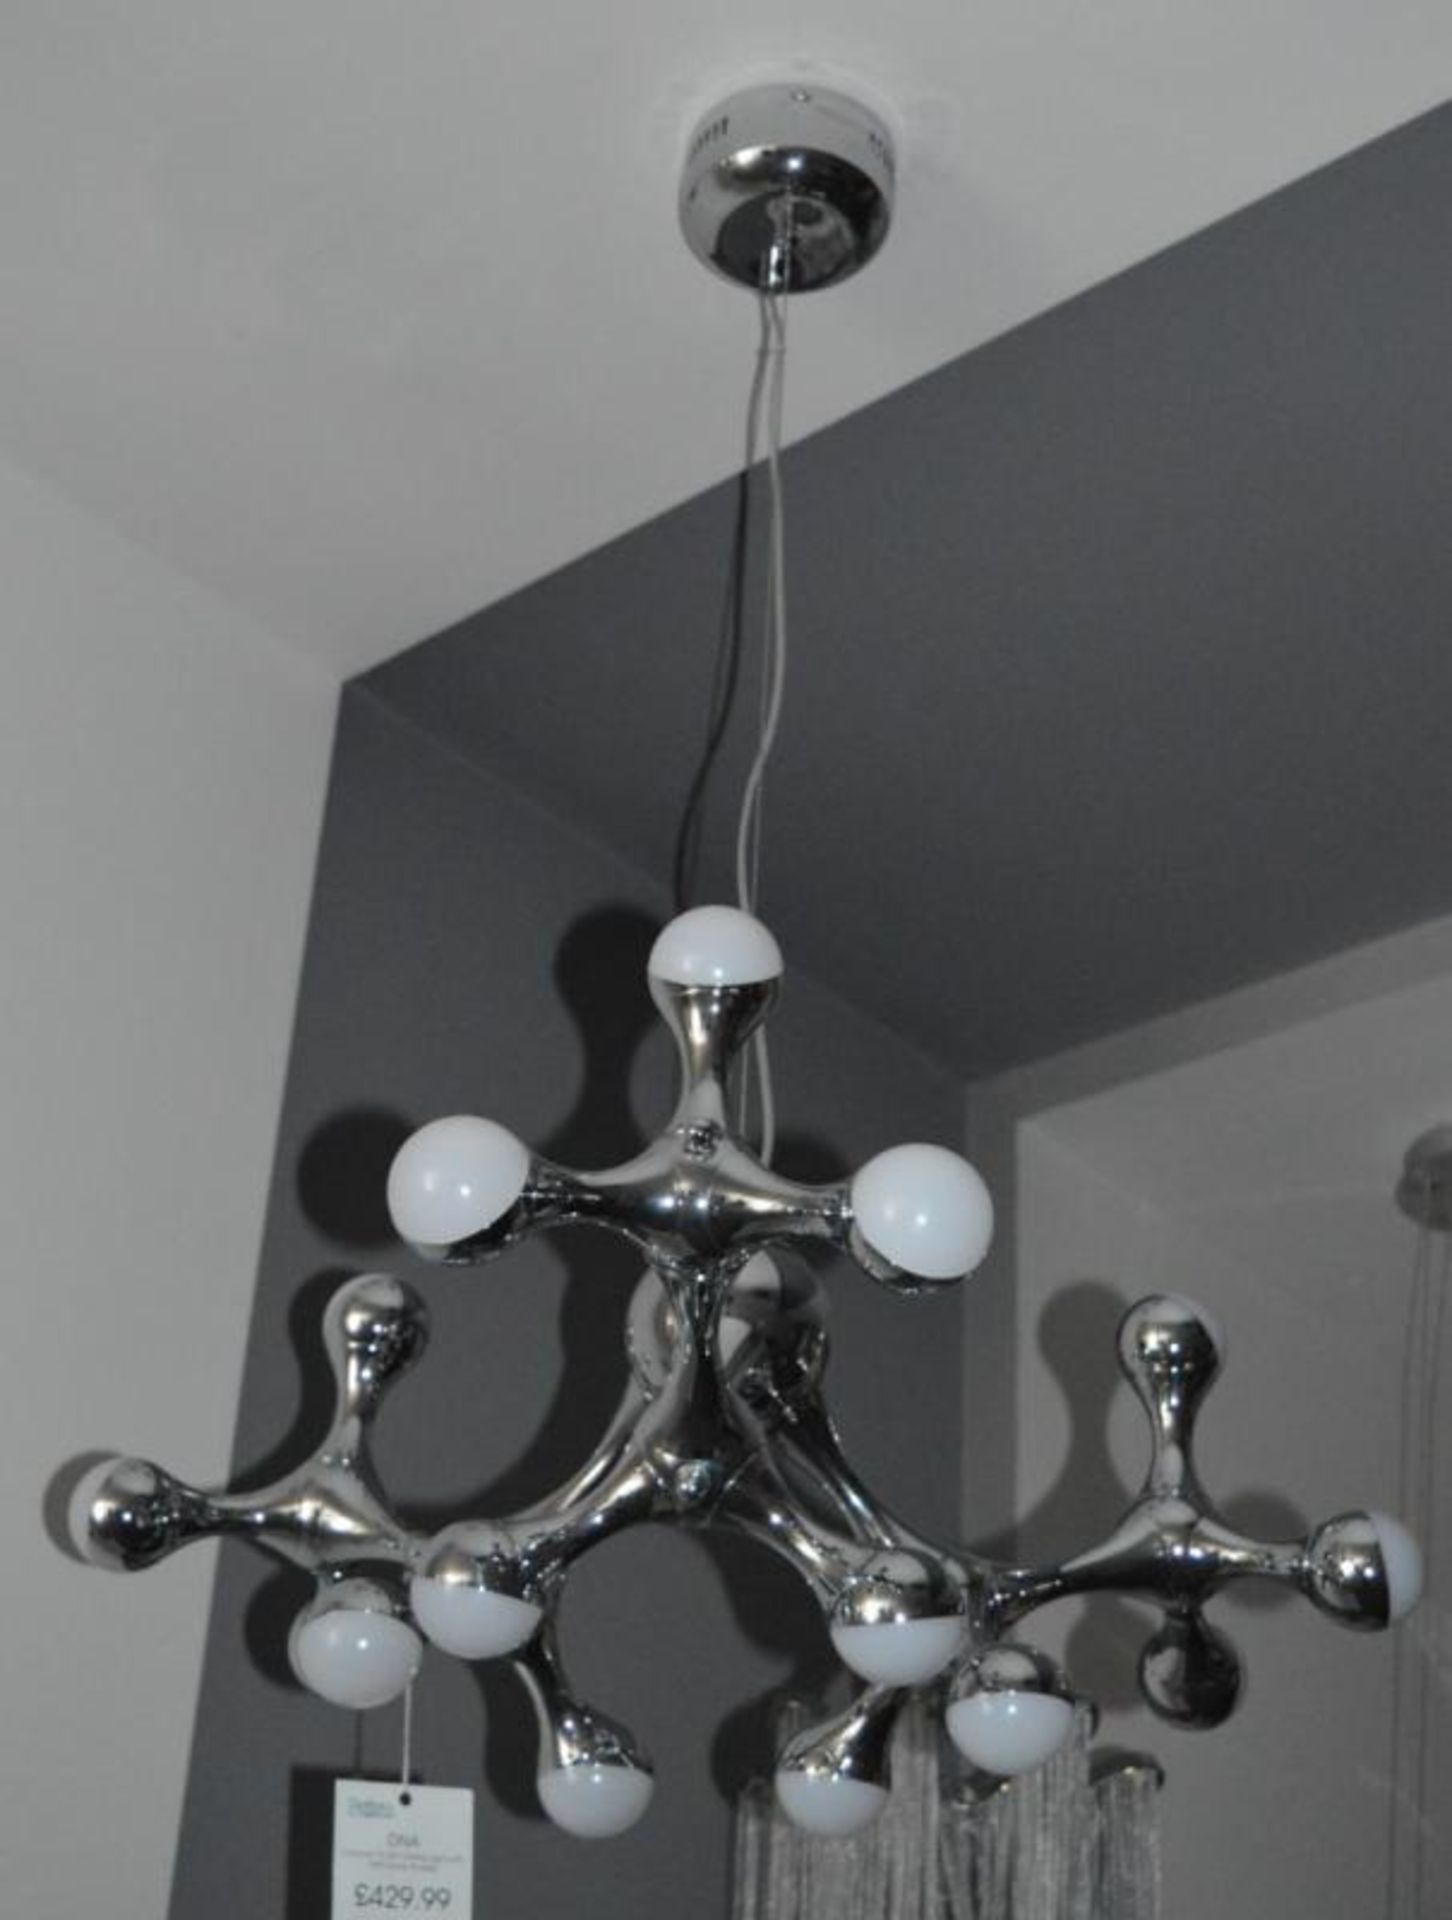 1 x DNA Chrome 15 LED Ceiling Light With Half Dome Shades - Contemporary European Design - Inspired - Image 5 of 6